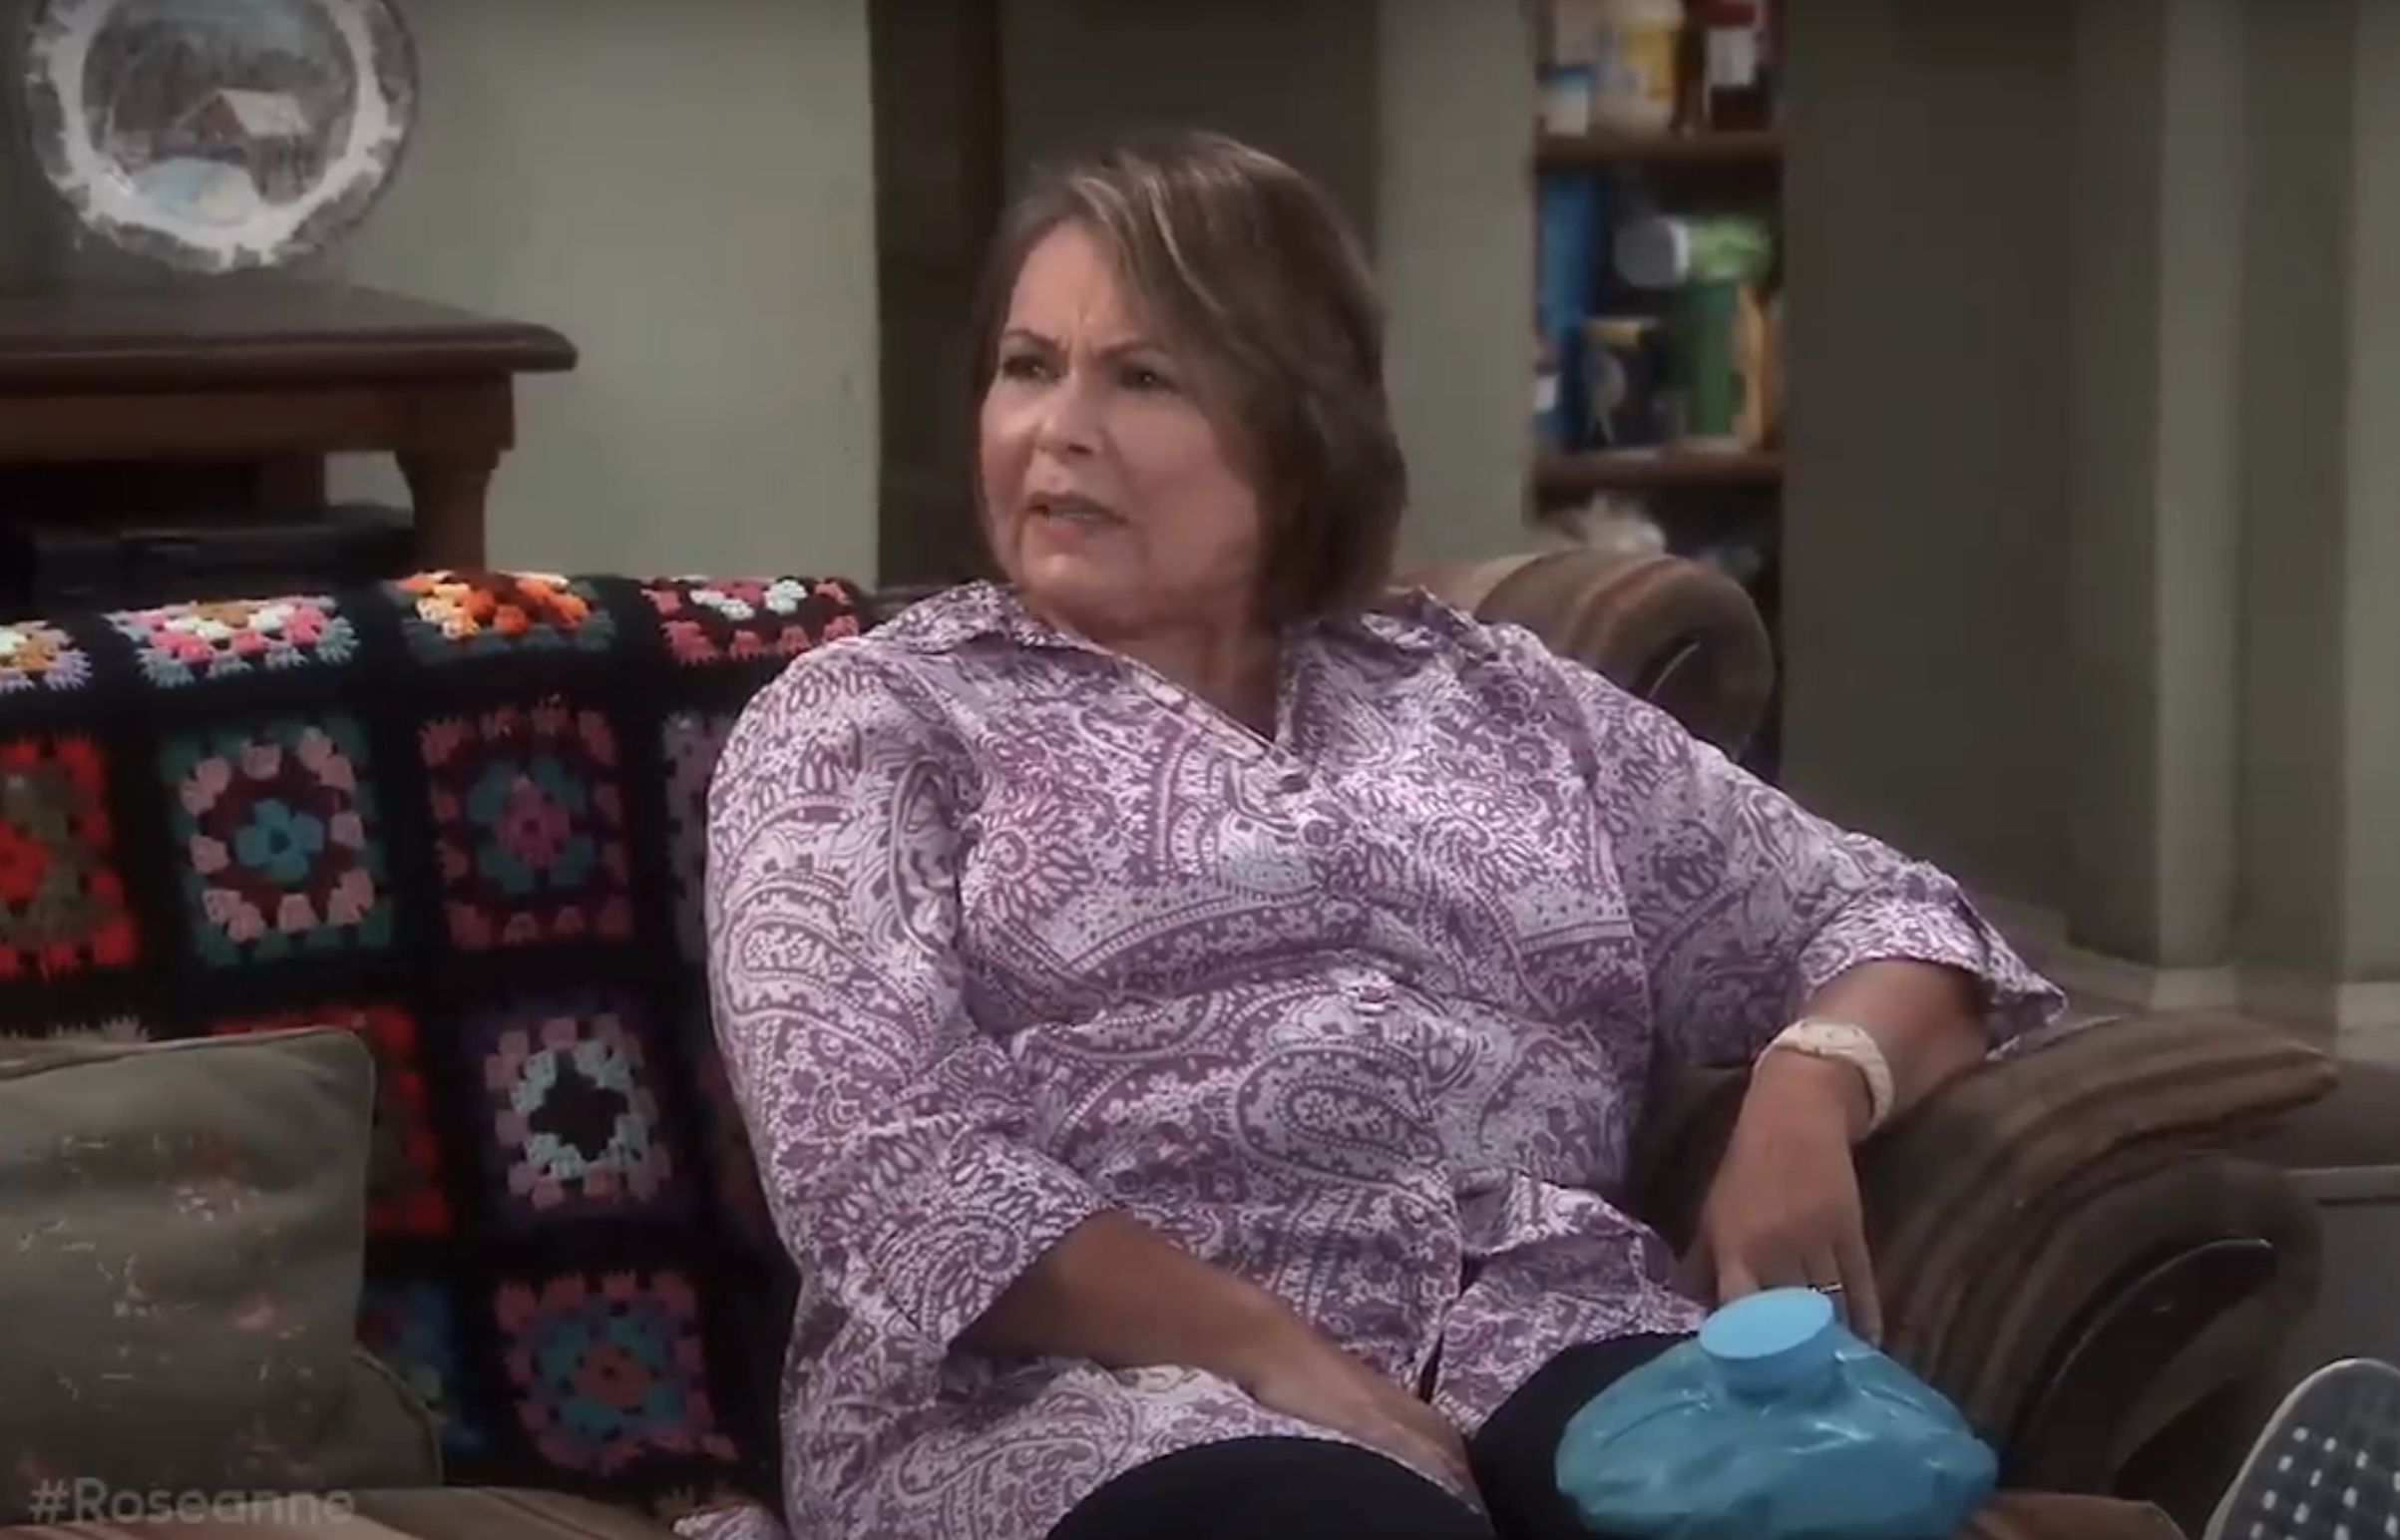 Roseanne Barr sits on a couch, holding an ice pack. The couch has a crocheted blanket on the back. She wears a patterned shirt and appears to be in conversation